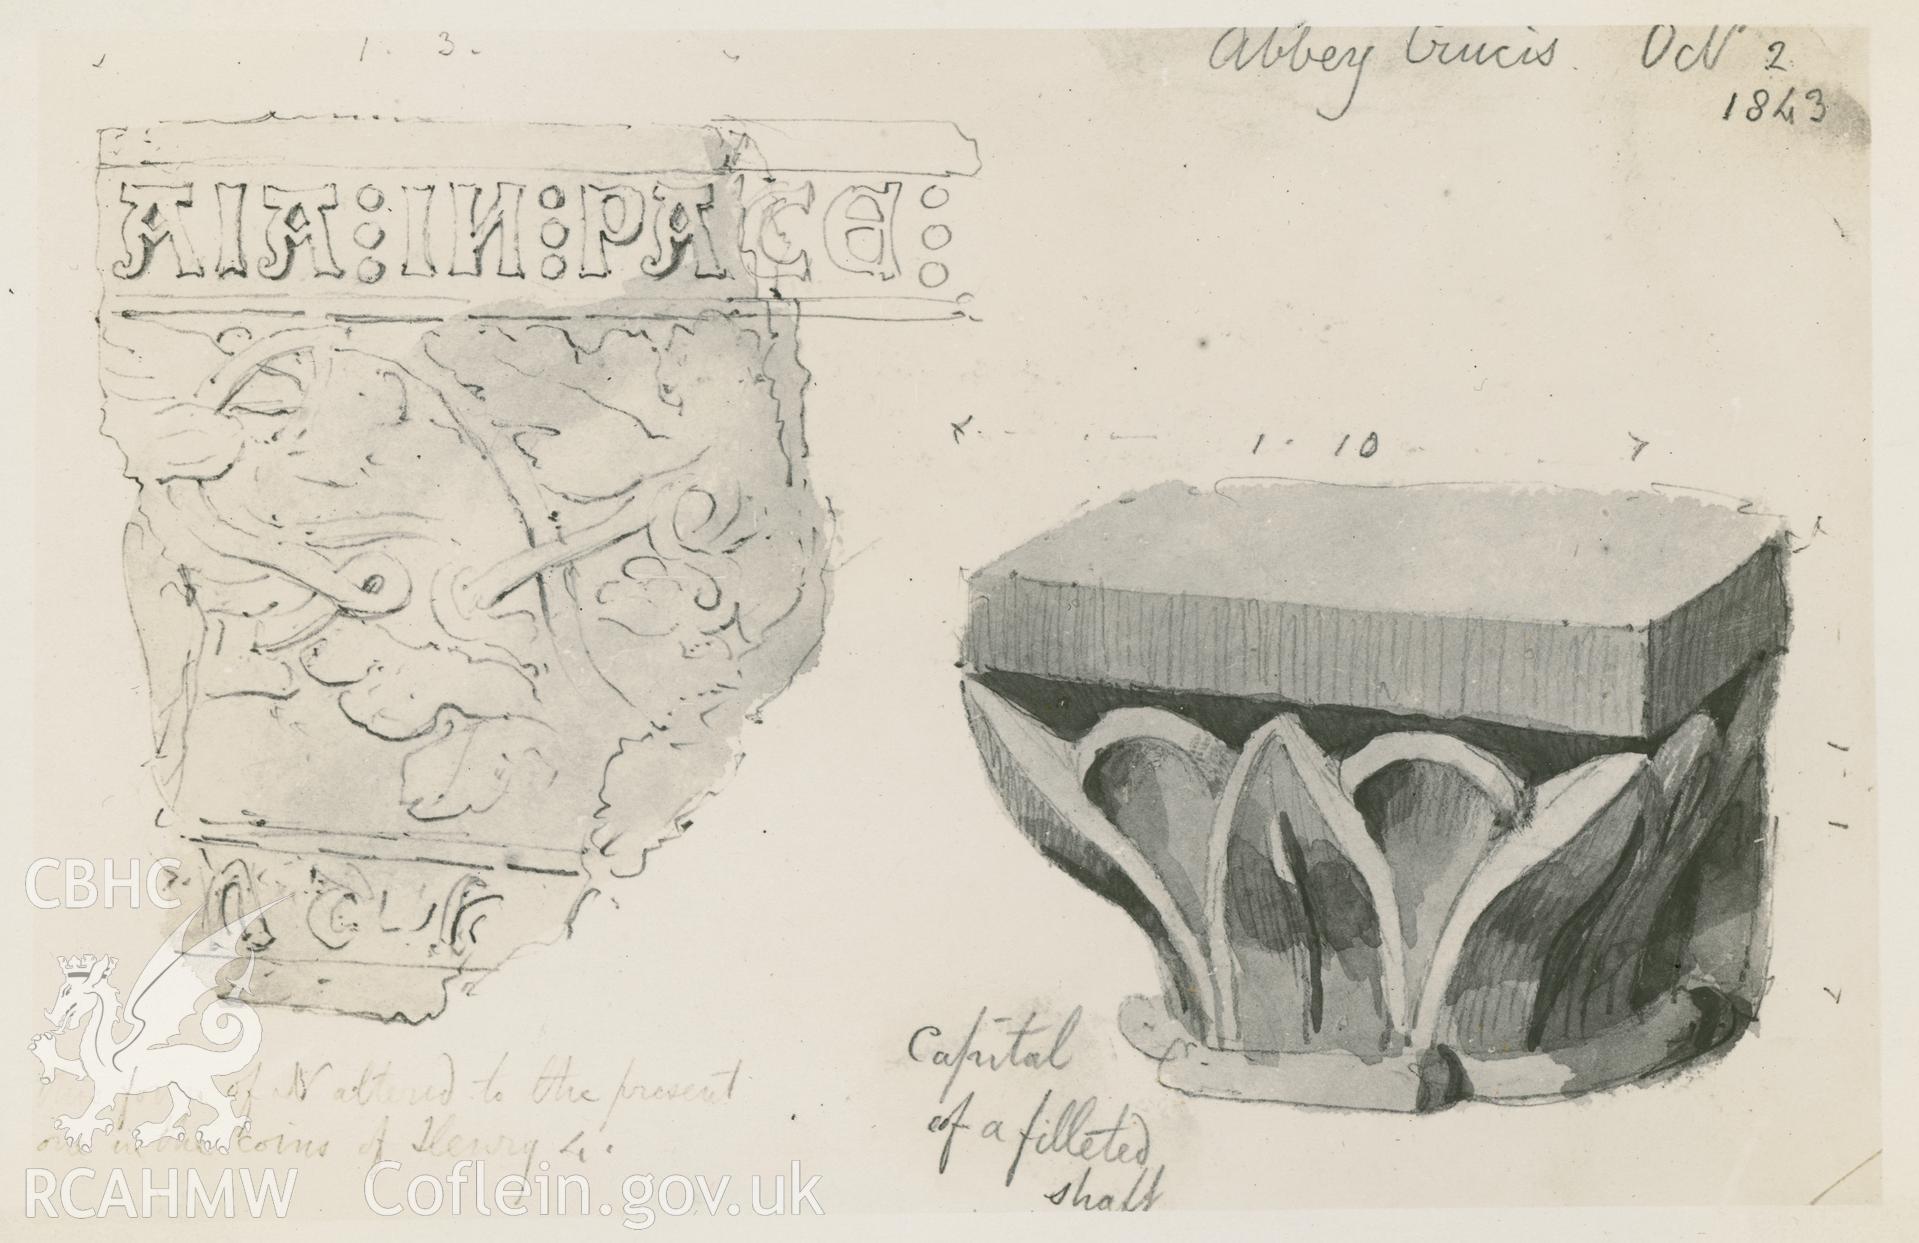 Photograph by Macbeth of an early pencil sketch showing detail of capital at Valle Crucis Abbey.